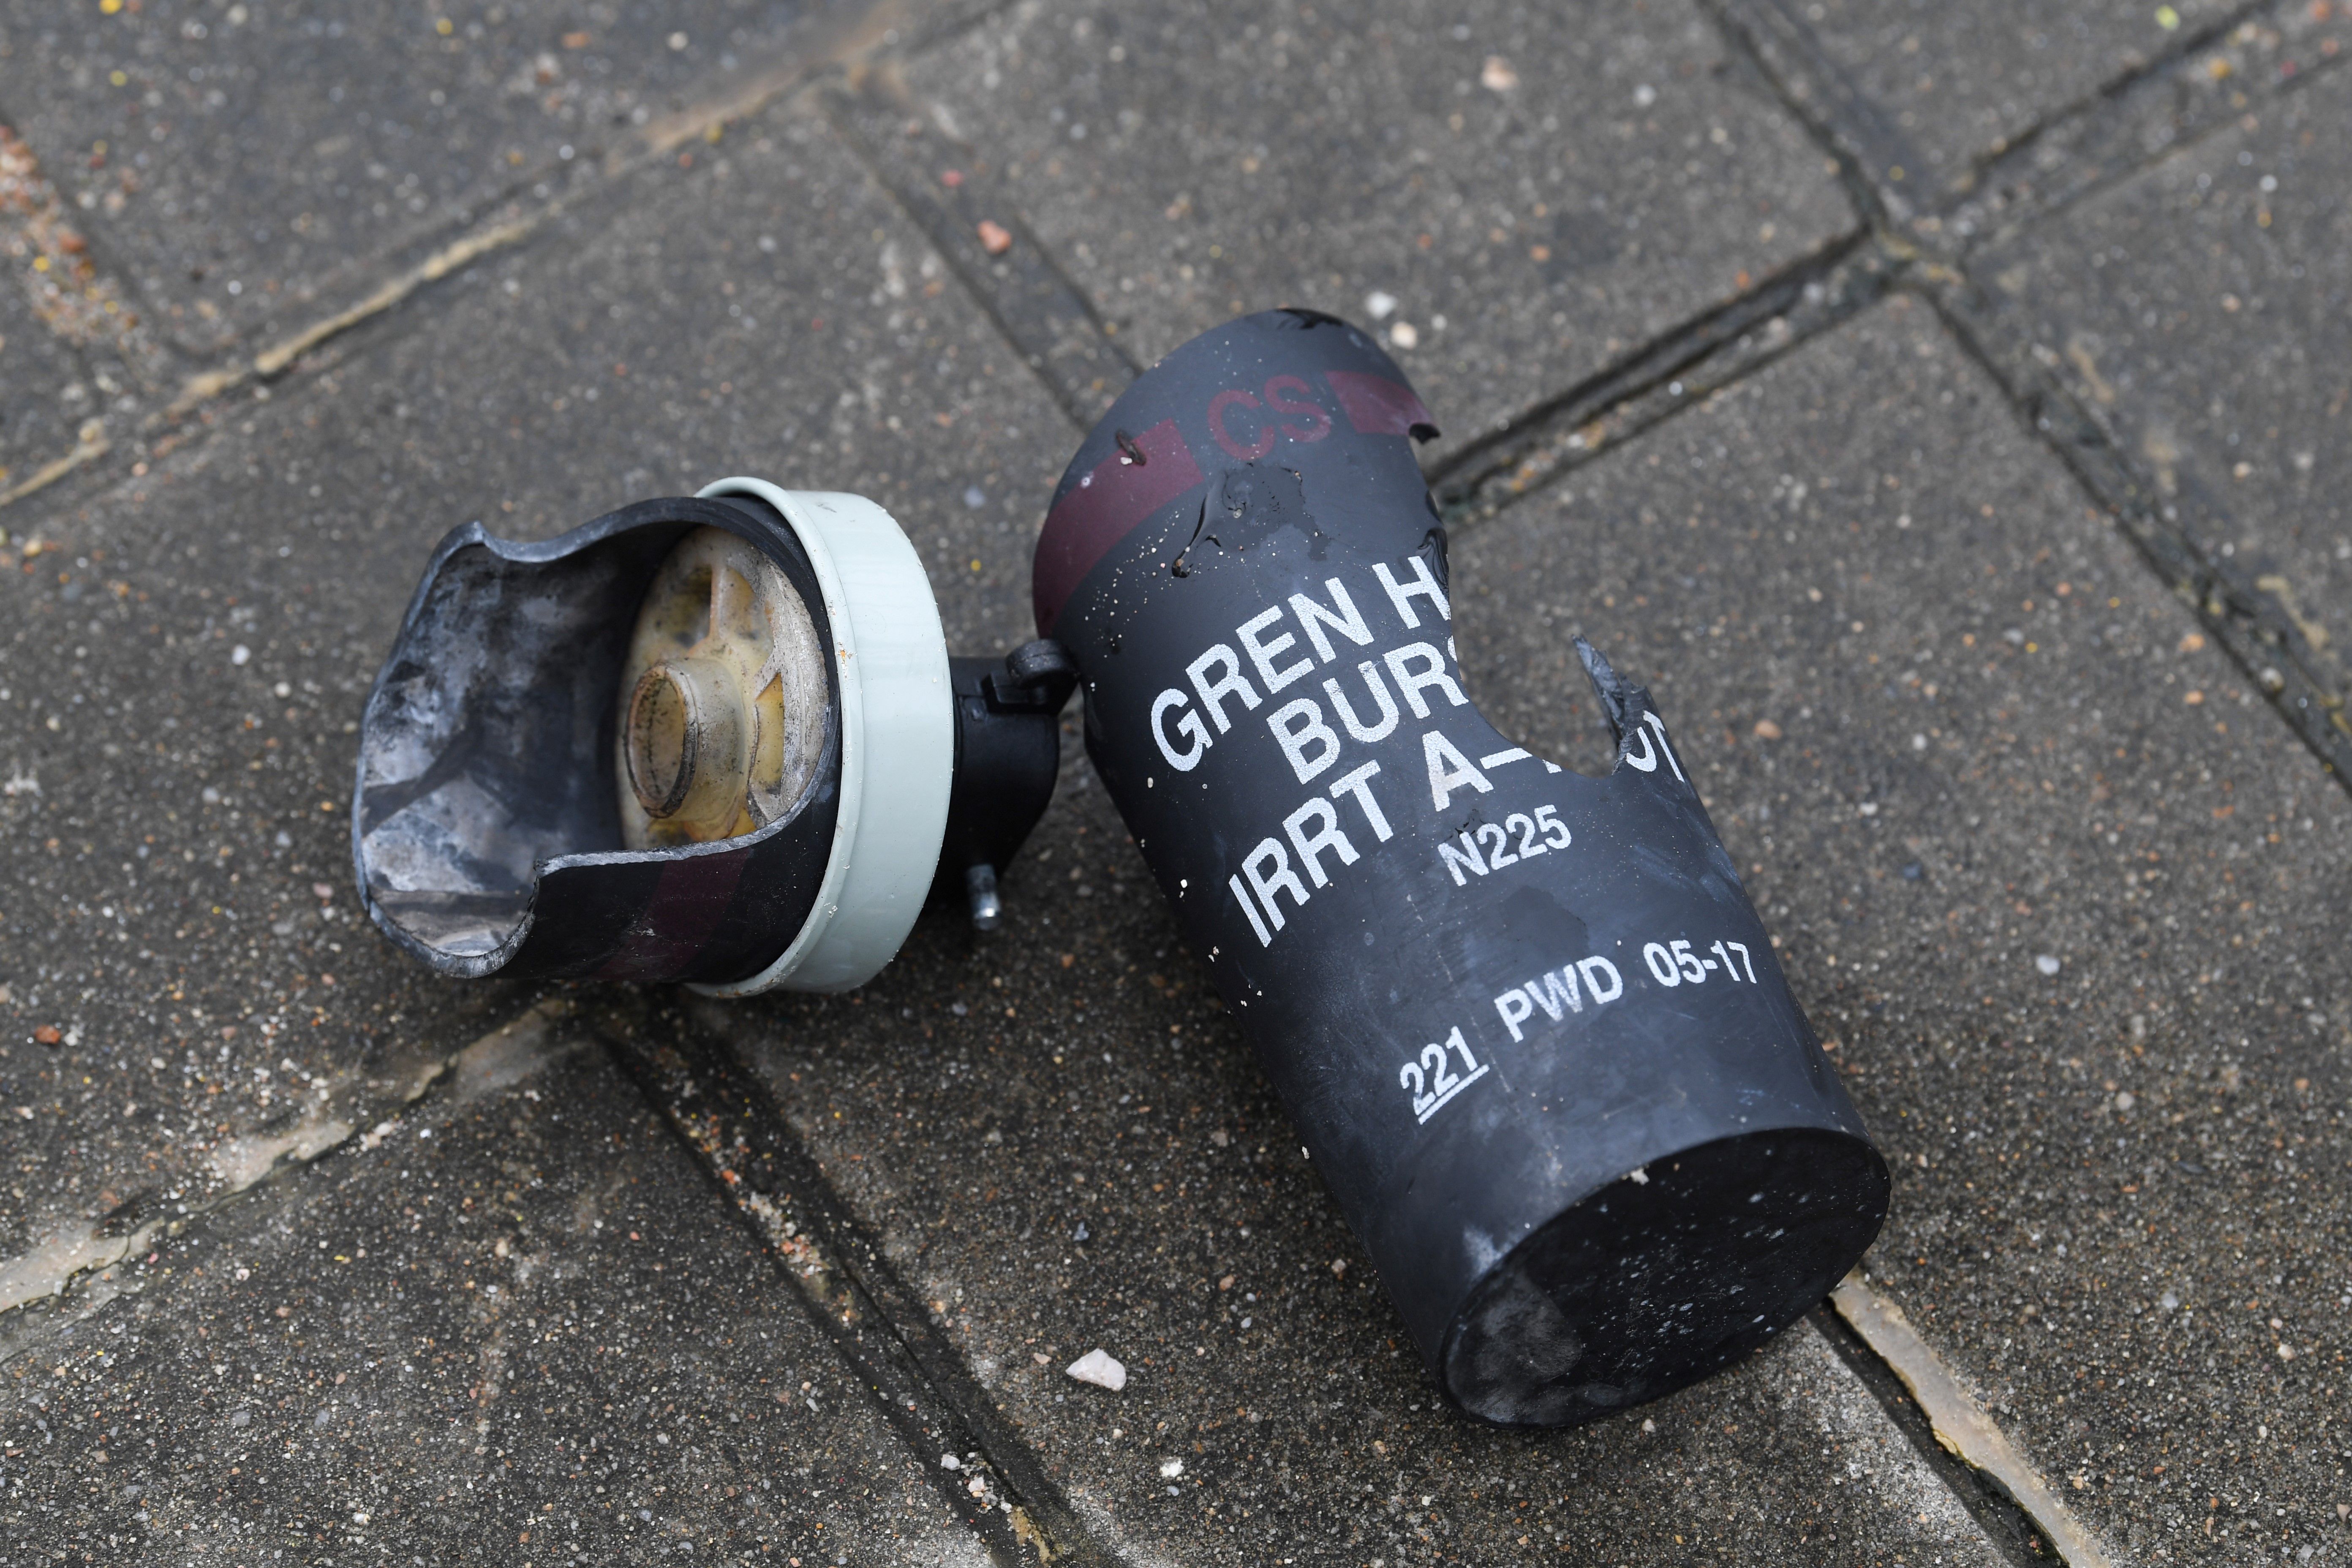  used tear gas shell is seen on a pavement a day after a violent demonstration.